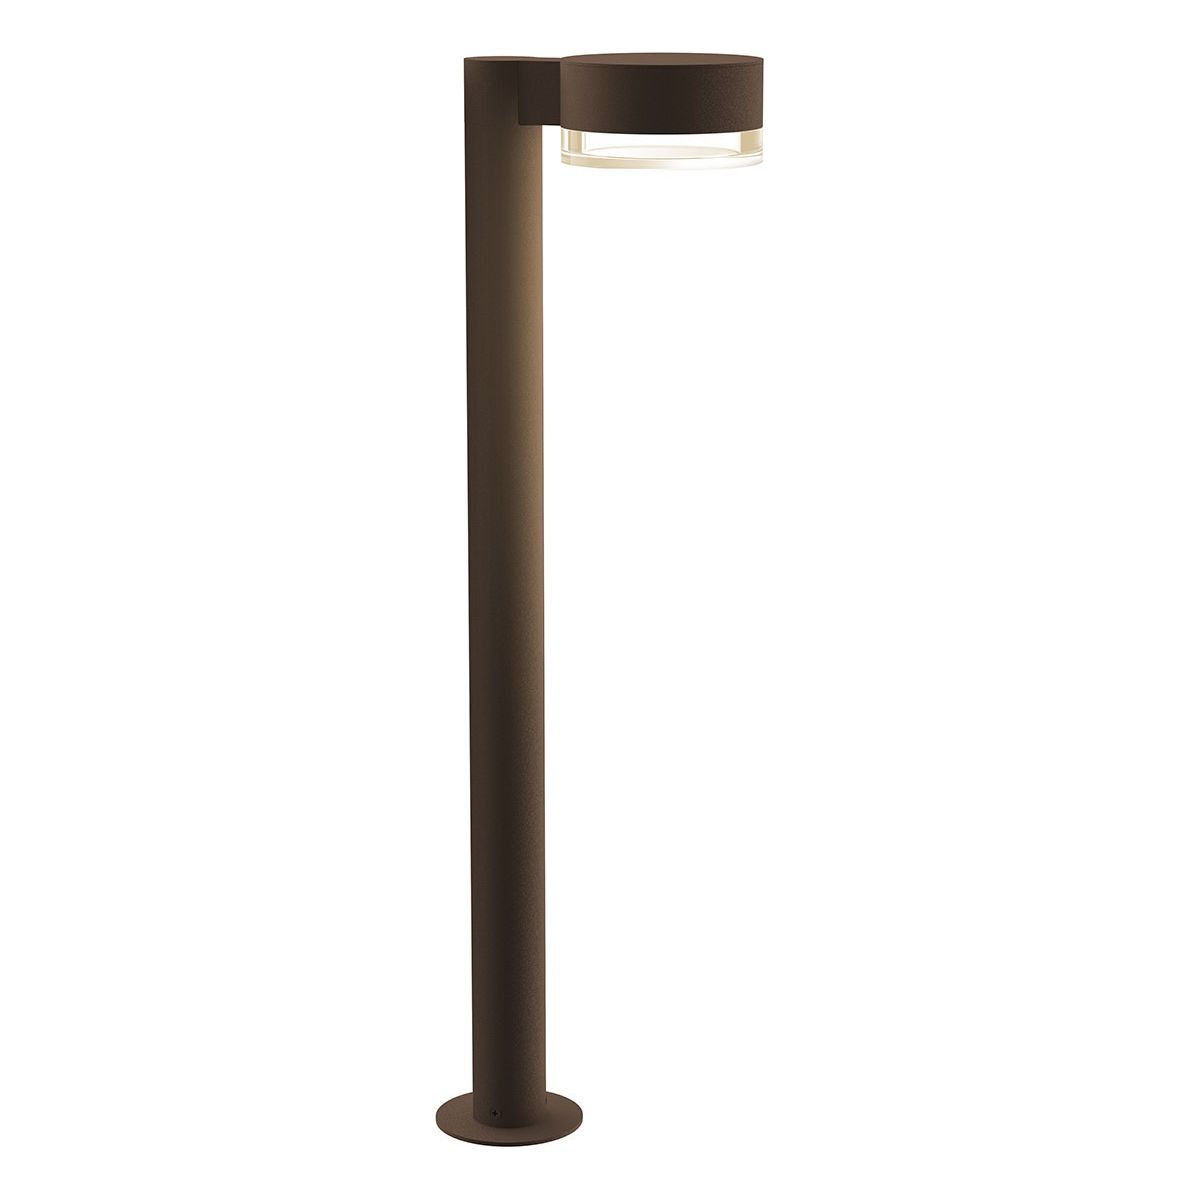 REALS 28" LED Bollard with Plate Cap and Cylinder Lens